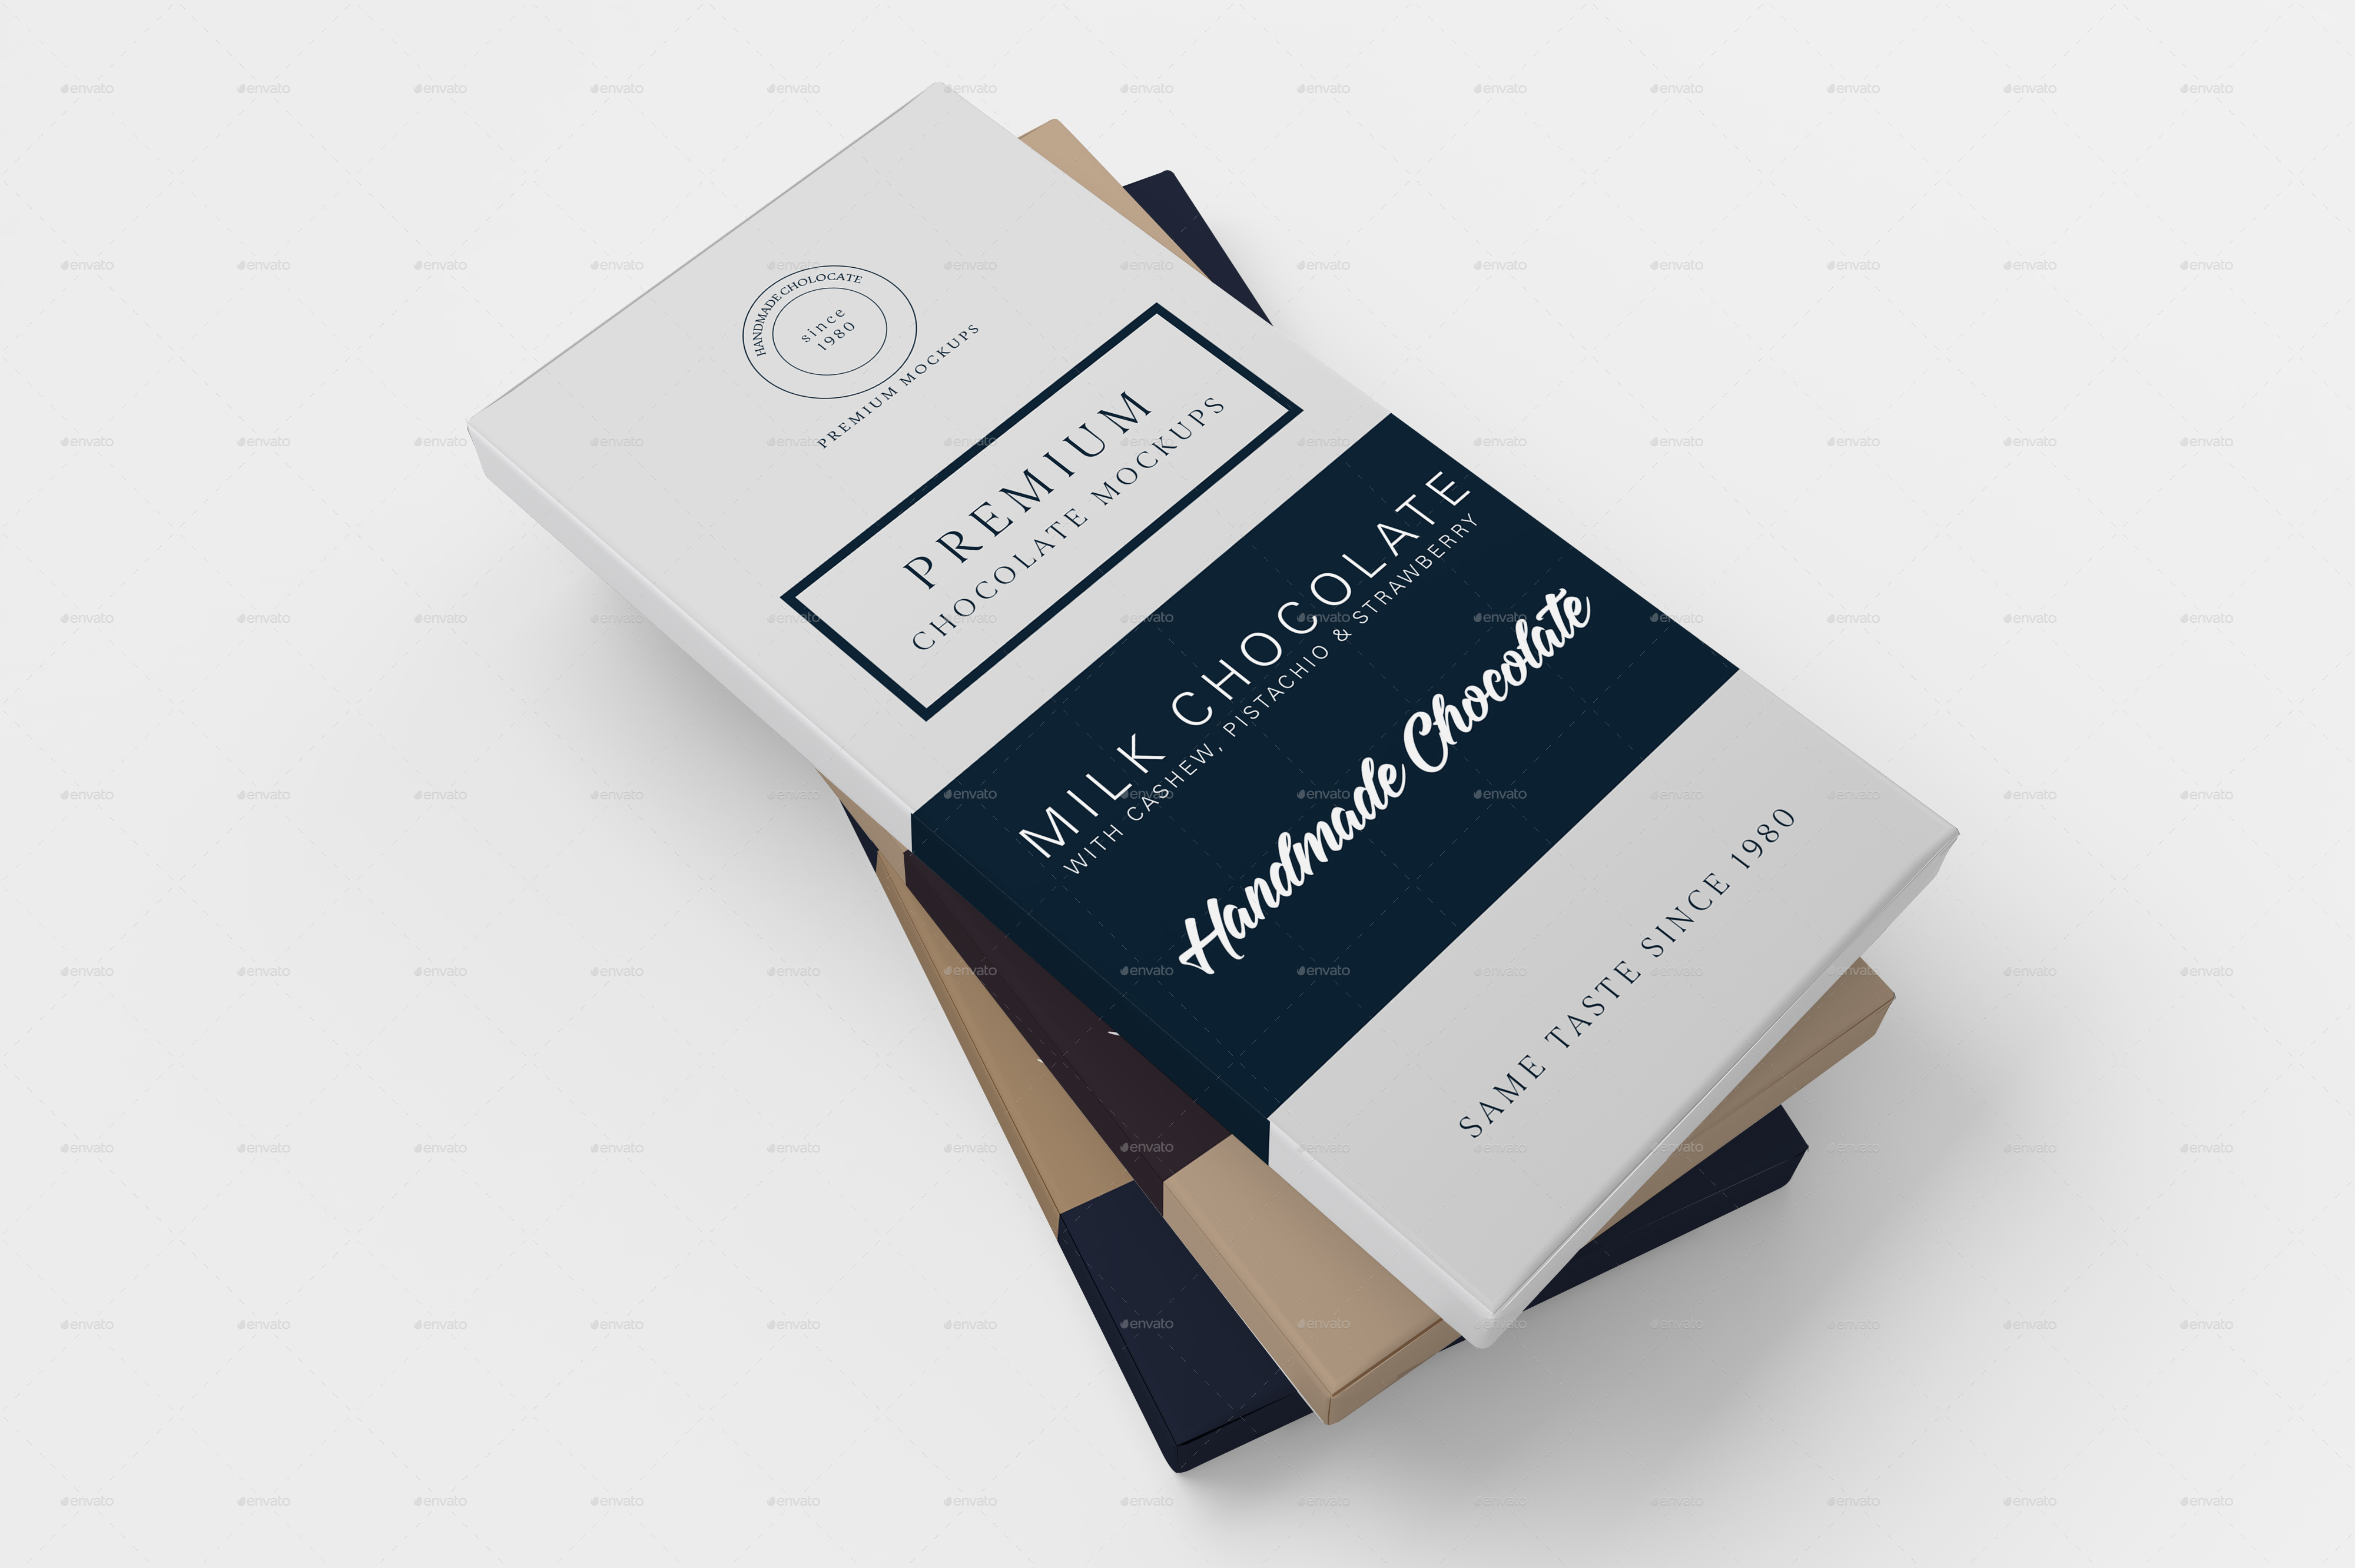 Download Chocolate Packaging Mockups by shrdesigns | GraphicRiver